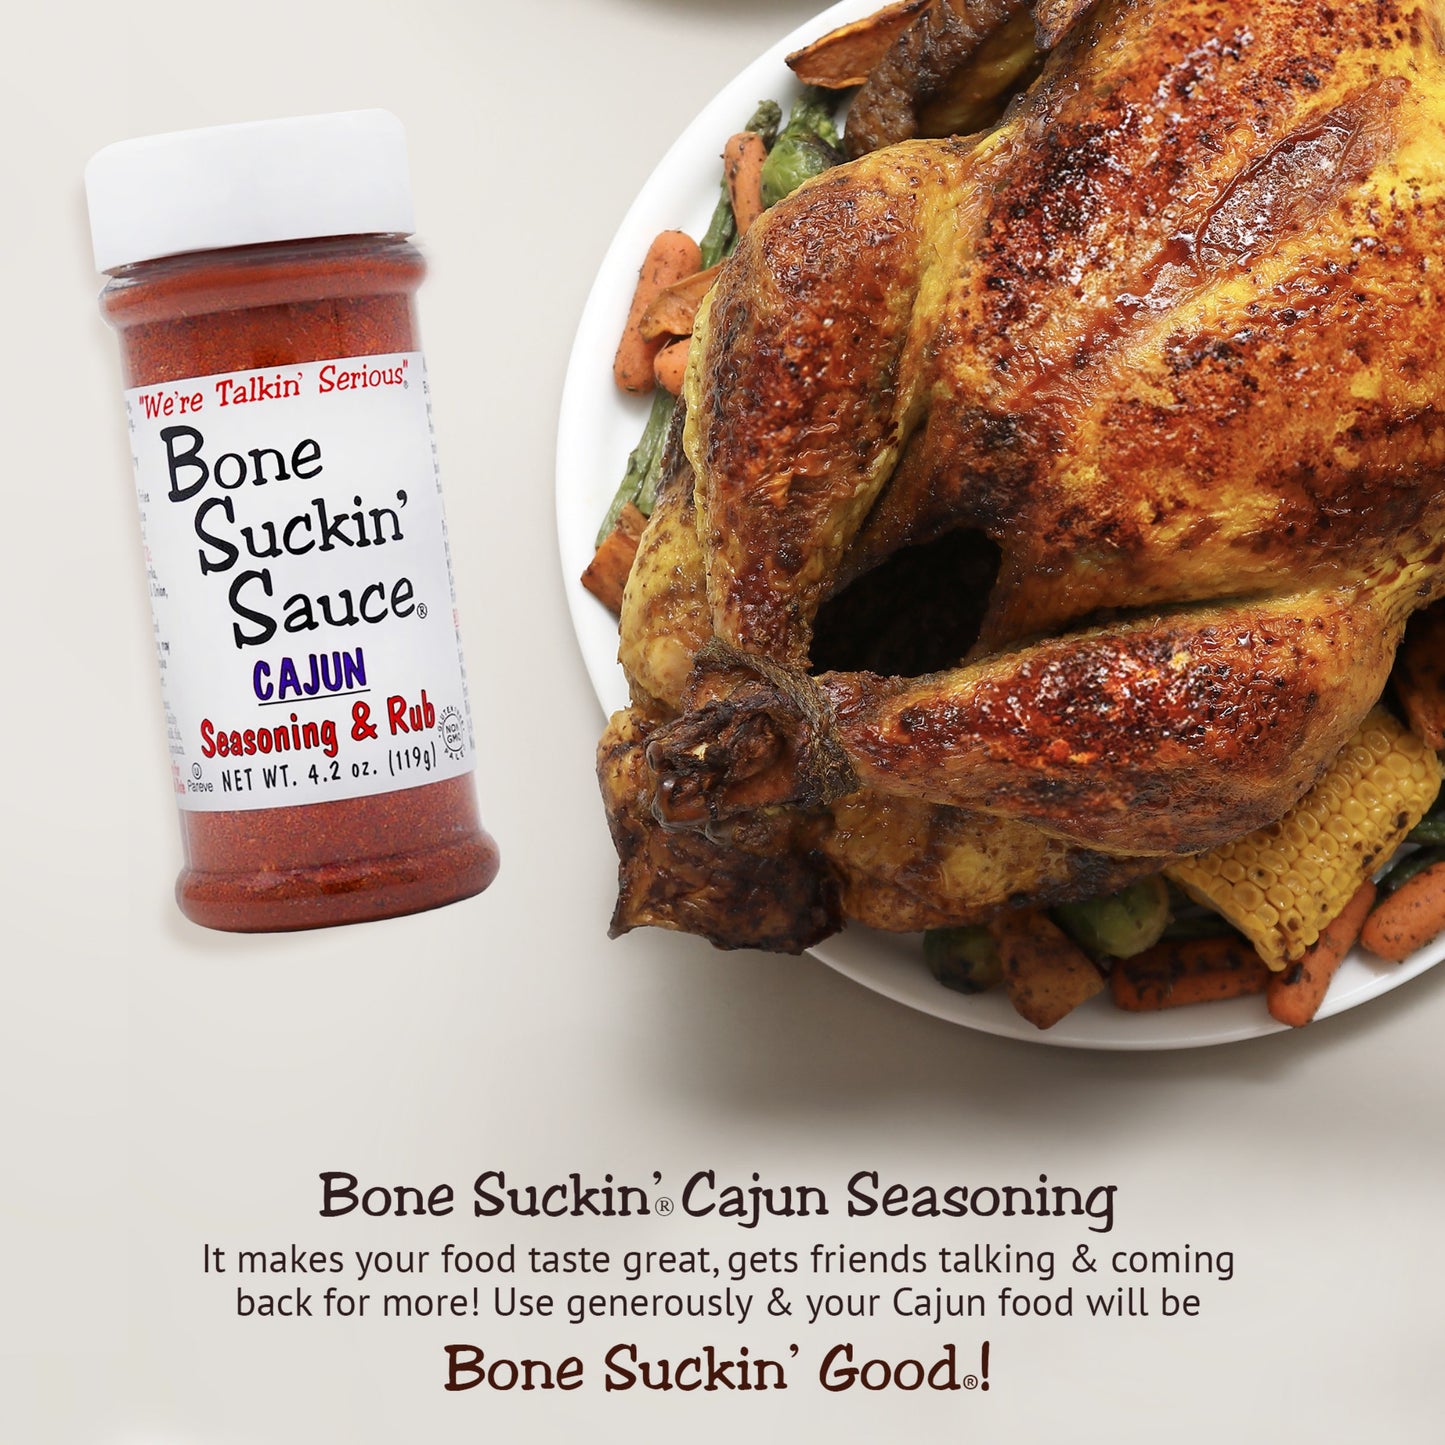 Bone Suckin'® Cajun Seasoning & Rub 4.2 oz. Bone Suckin'® Cajun Seasoning & Rub is the perfect blend of Cajun spices & herbs along with the right amount of heat. It makes your food taste great, gets friends talking & coming back for more! Use generously & your Cajun food will be "Bone Suckin'® Good!" Use On Seafood, Poultry, Steaks, Pork, Pasta, French Fries, Rice, Vegetables, Gumbos, Jambalayas & more!